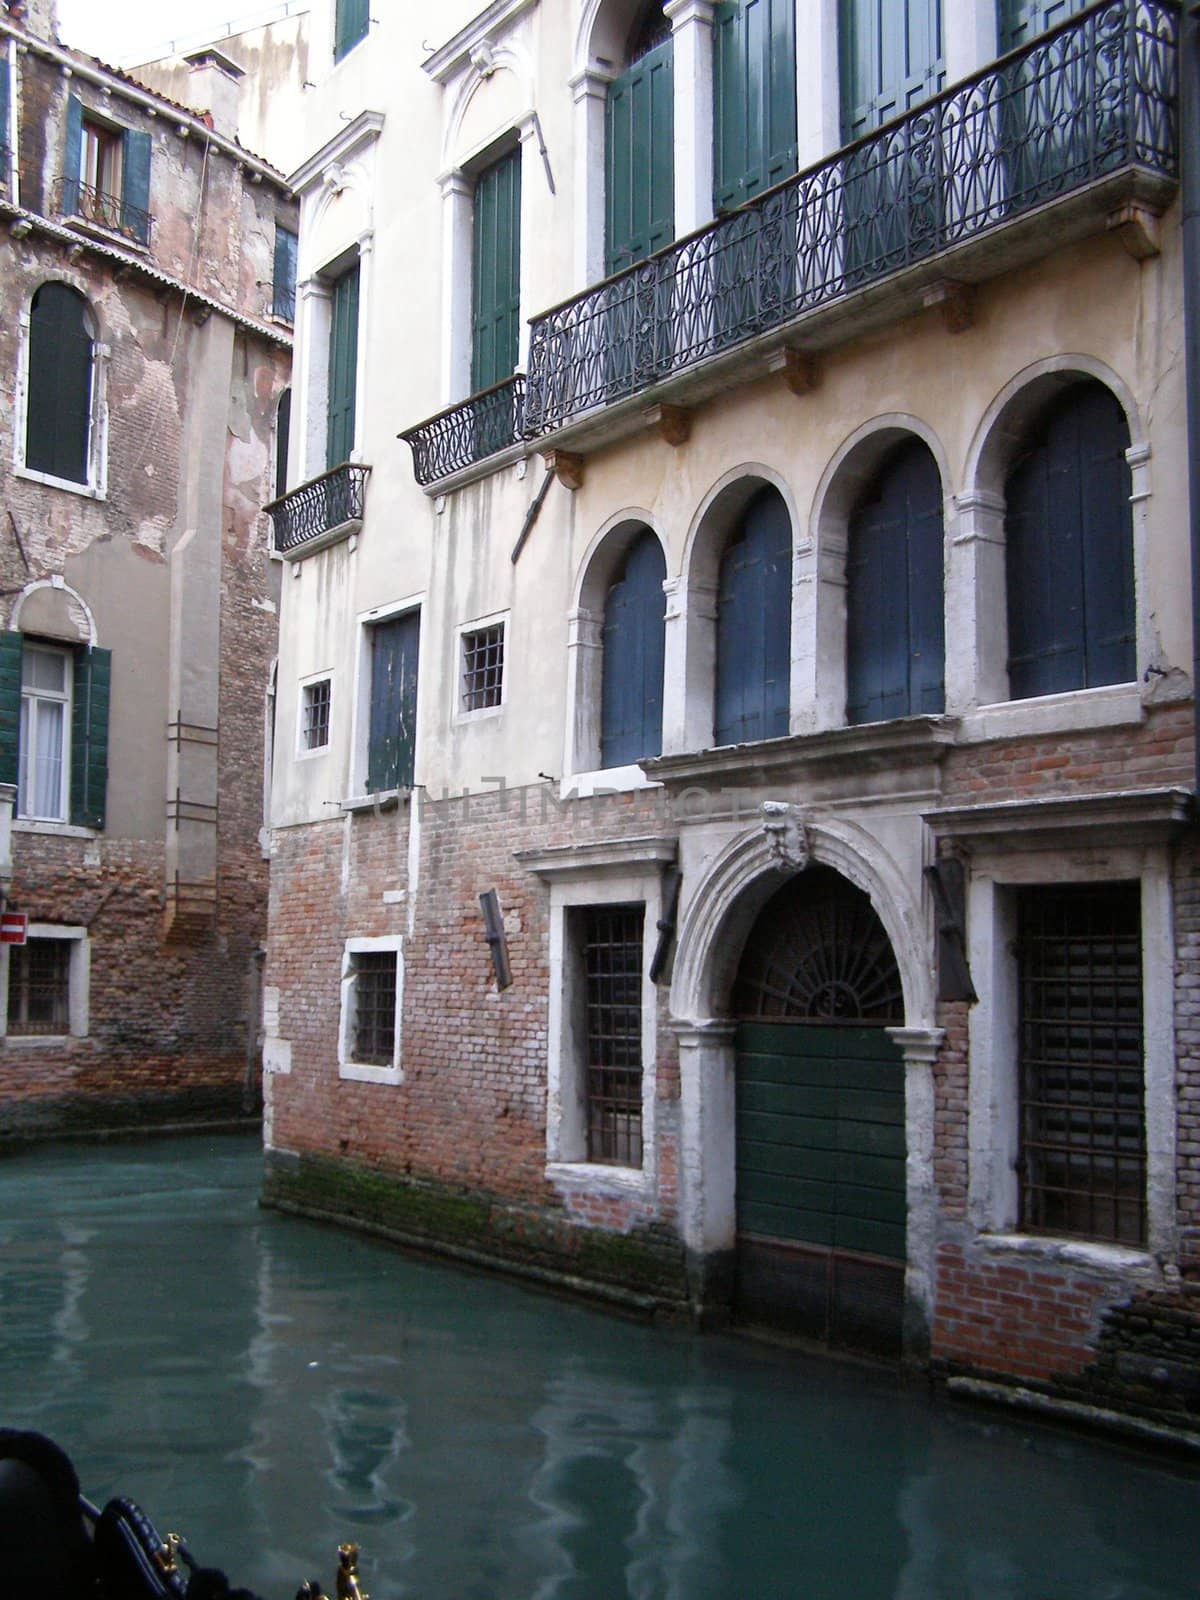 Venice, a unique and picturesque ancient town in Italy